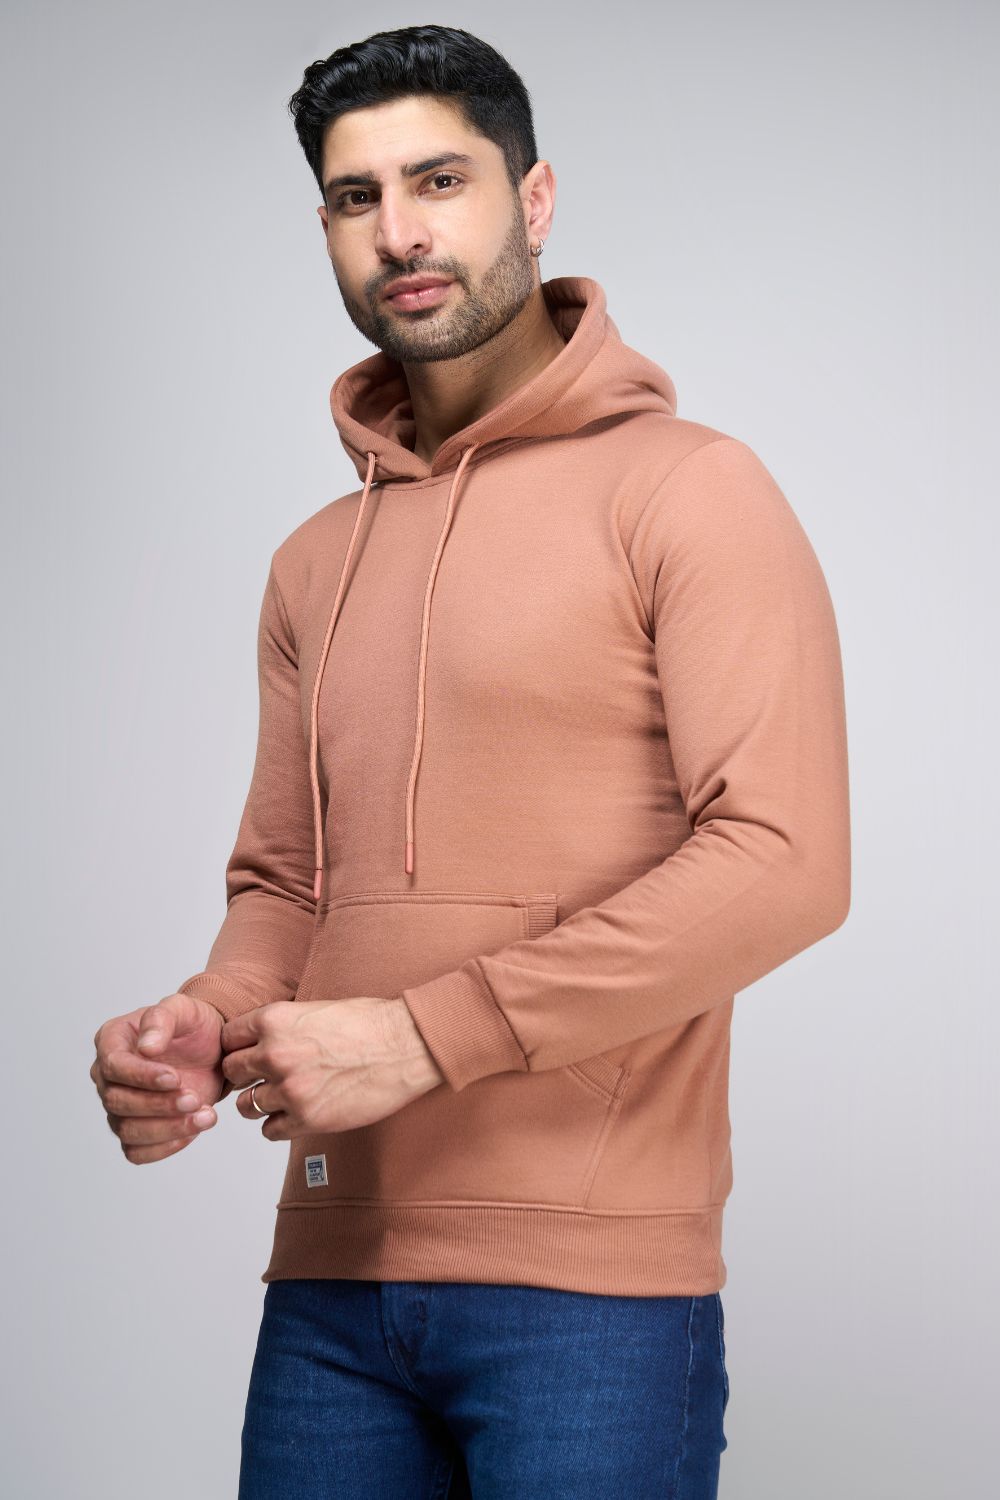 Leather Brown colored, hoodie for men with full sleeves and relaxed fit, side view.